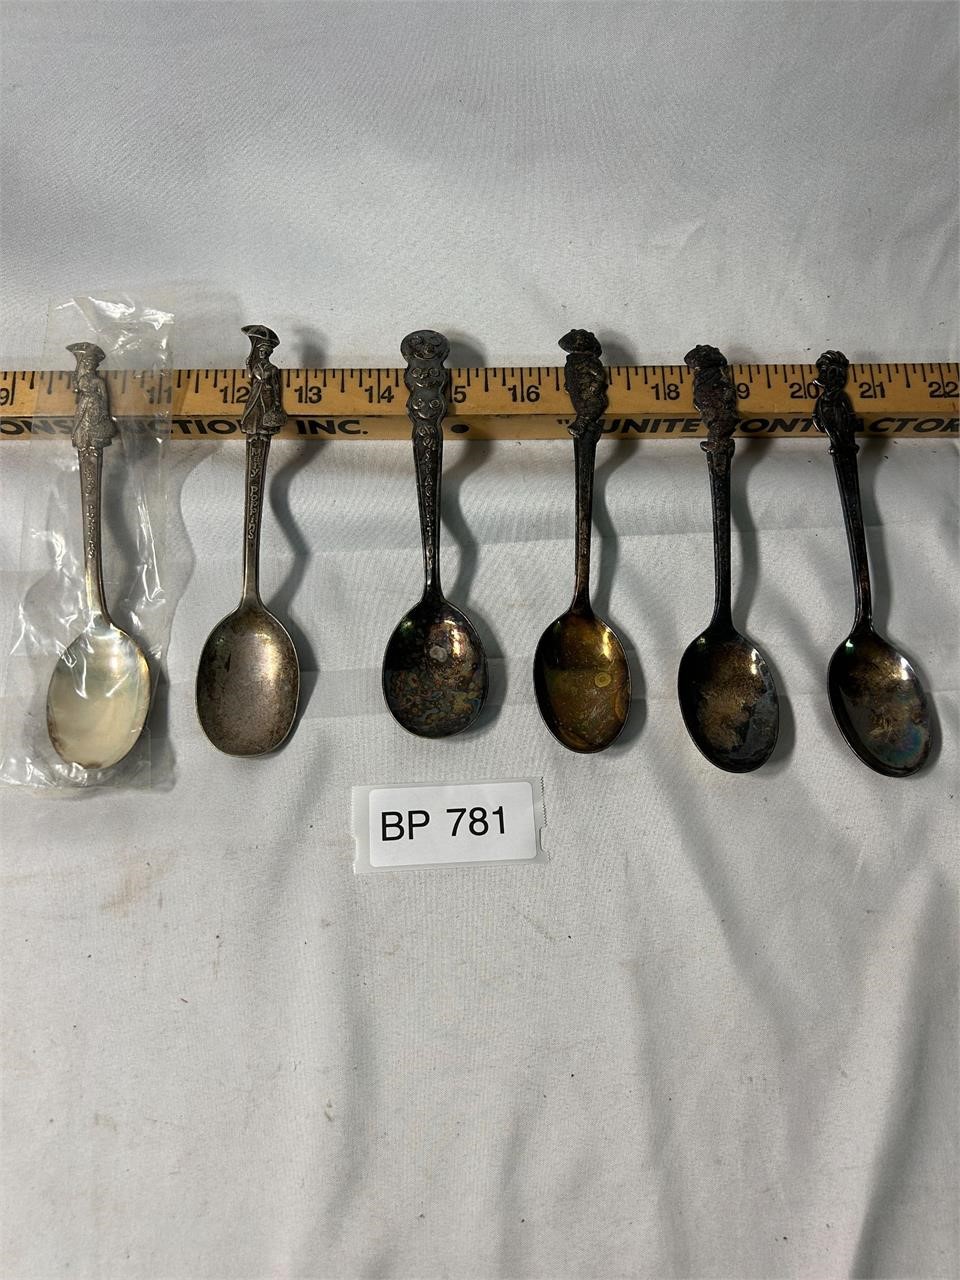 VTG Silver Plated Spoons Marry Poppins Disney More